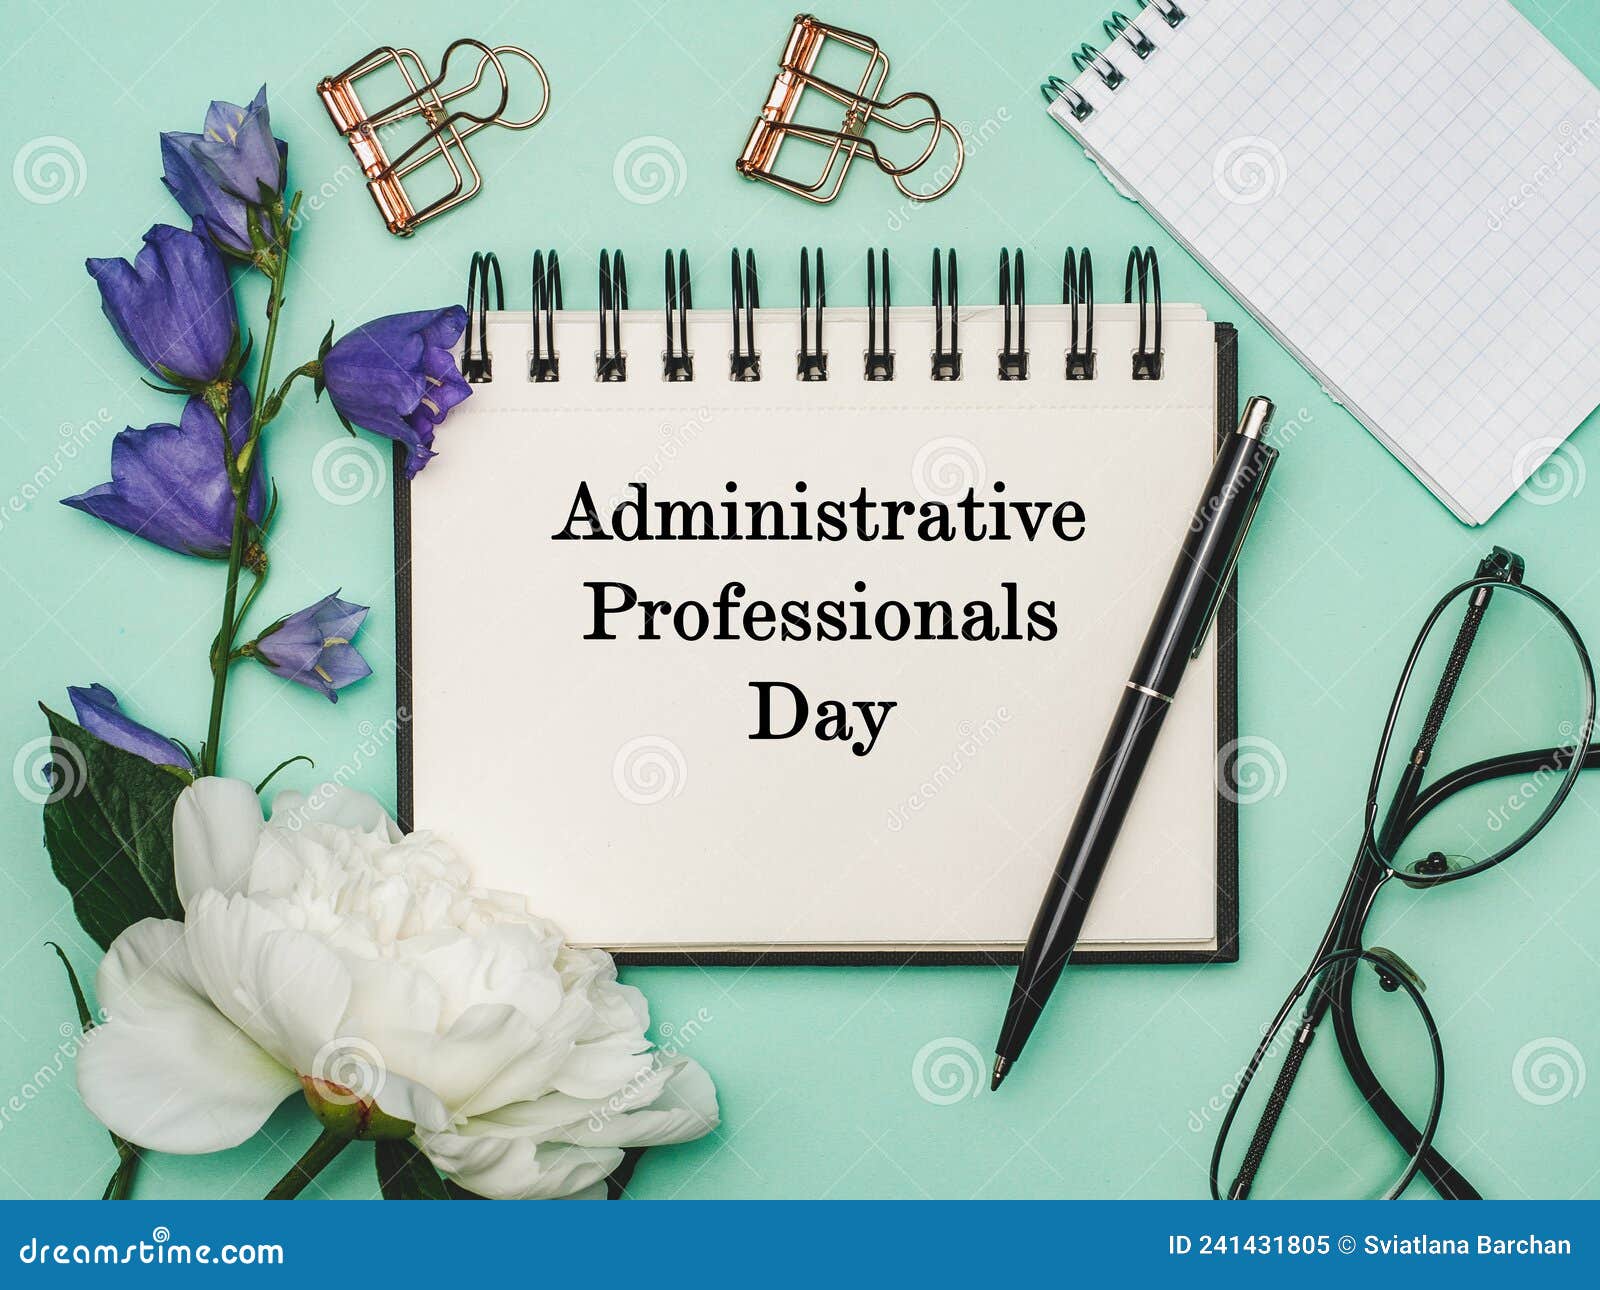 happy administrative professionals day. greeting card. close-up